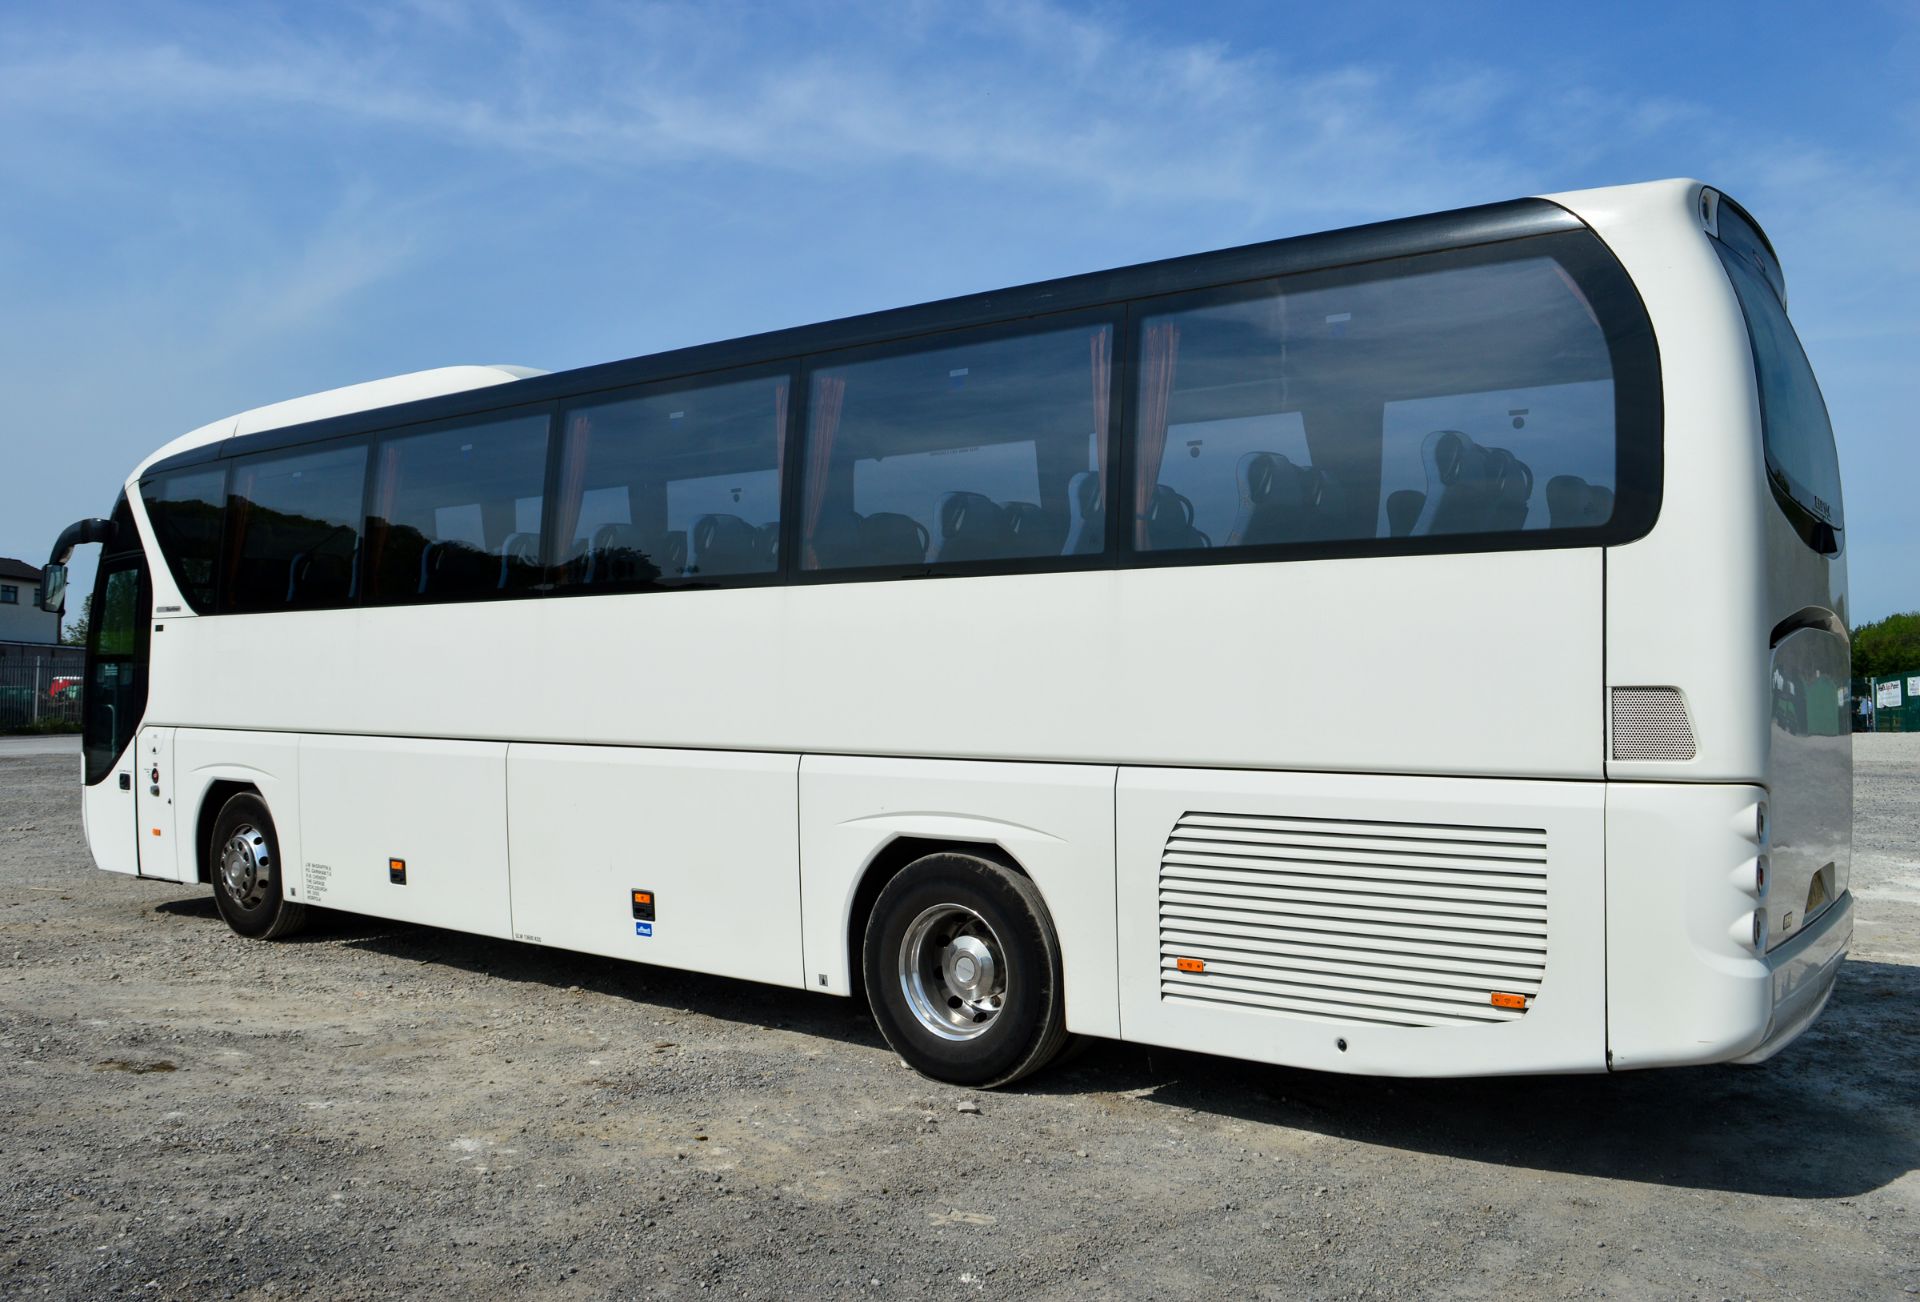 Neoplan Tourliner 49 seat luxury coach Registration Number: MJ11 KVG (UPV 337 has been retained) - Image 4 of 11